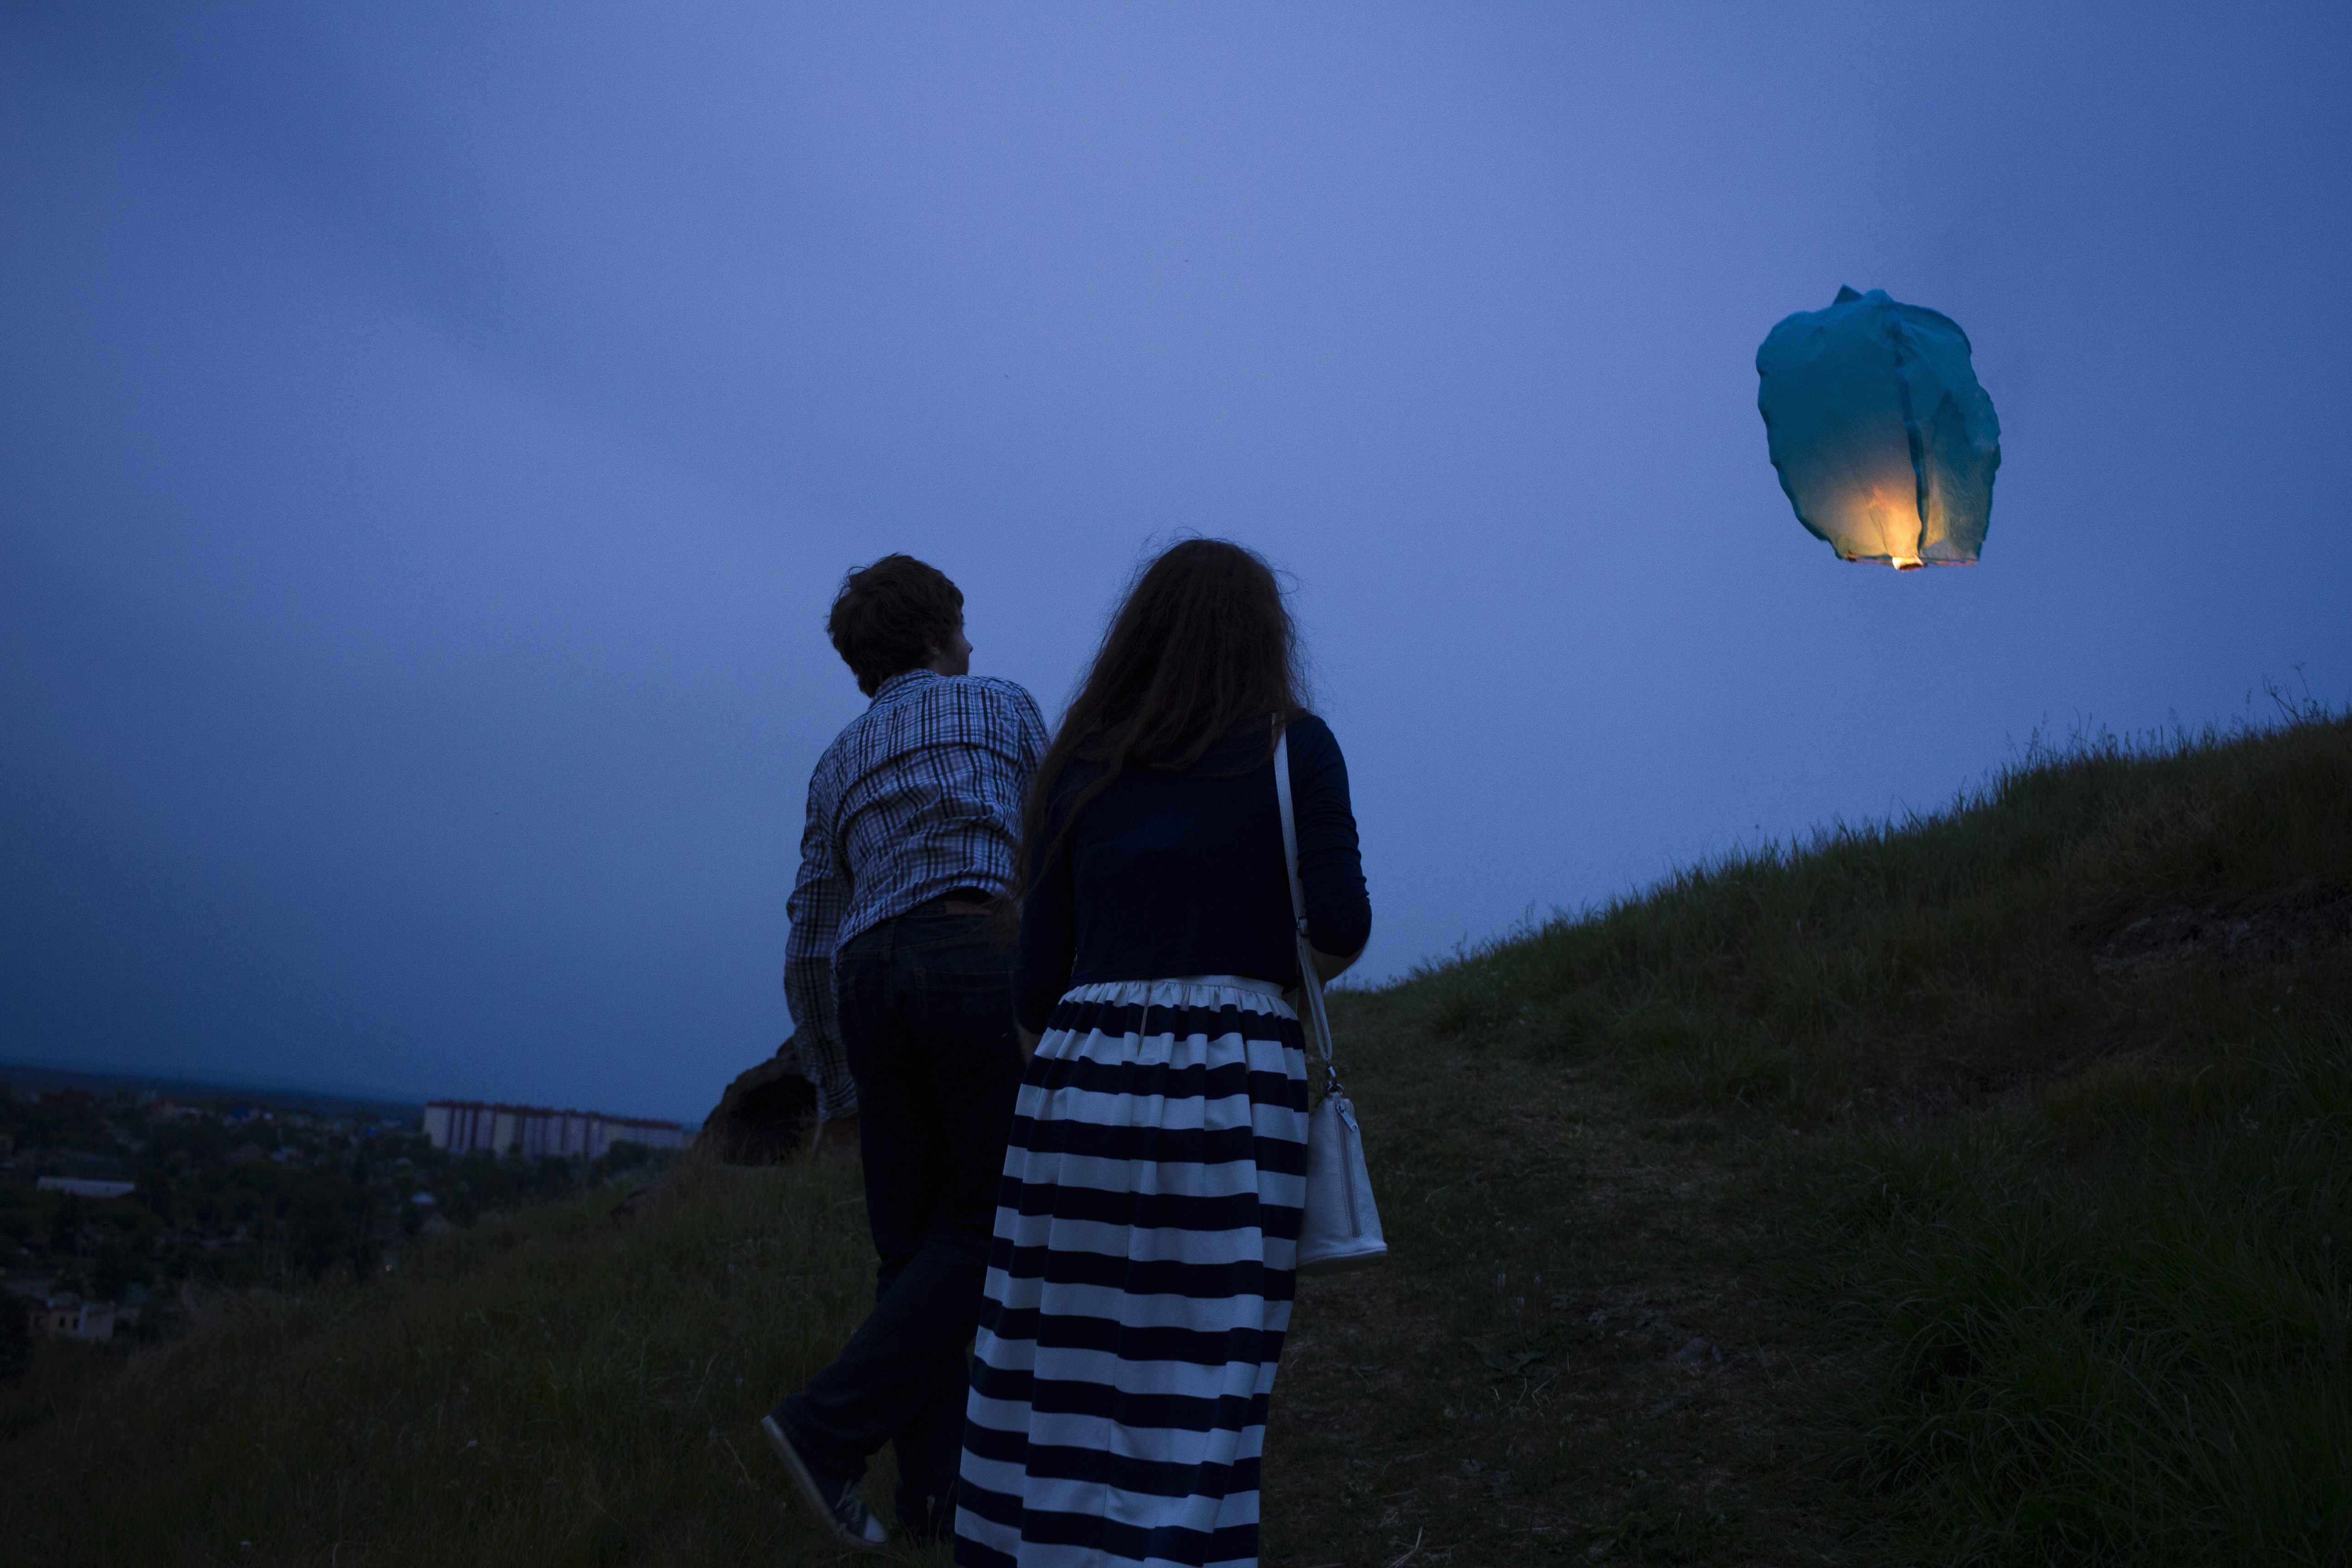 Couple walking up grassy hill at dusk, watching sky lantern in air. | Source: Getty Images